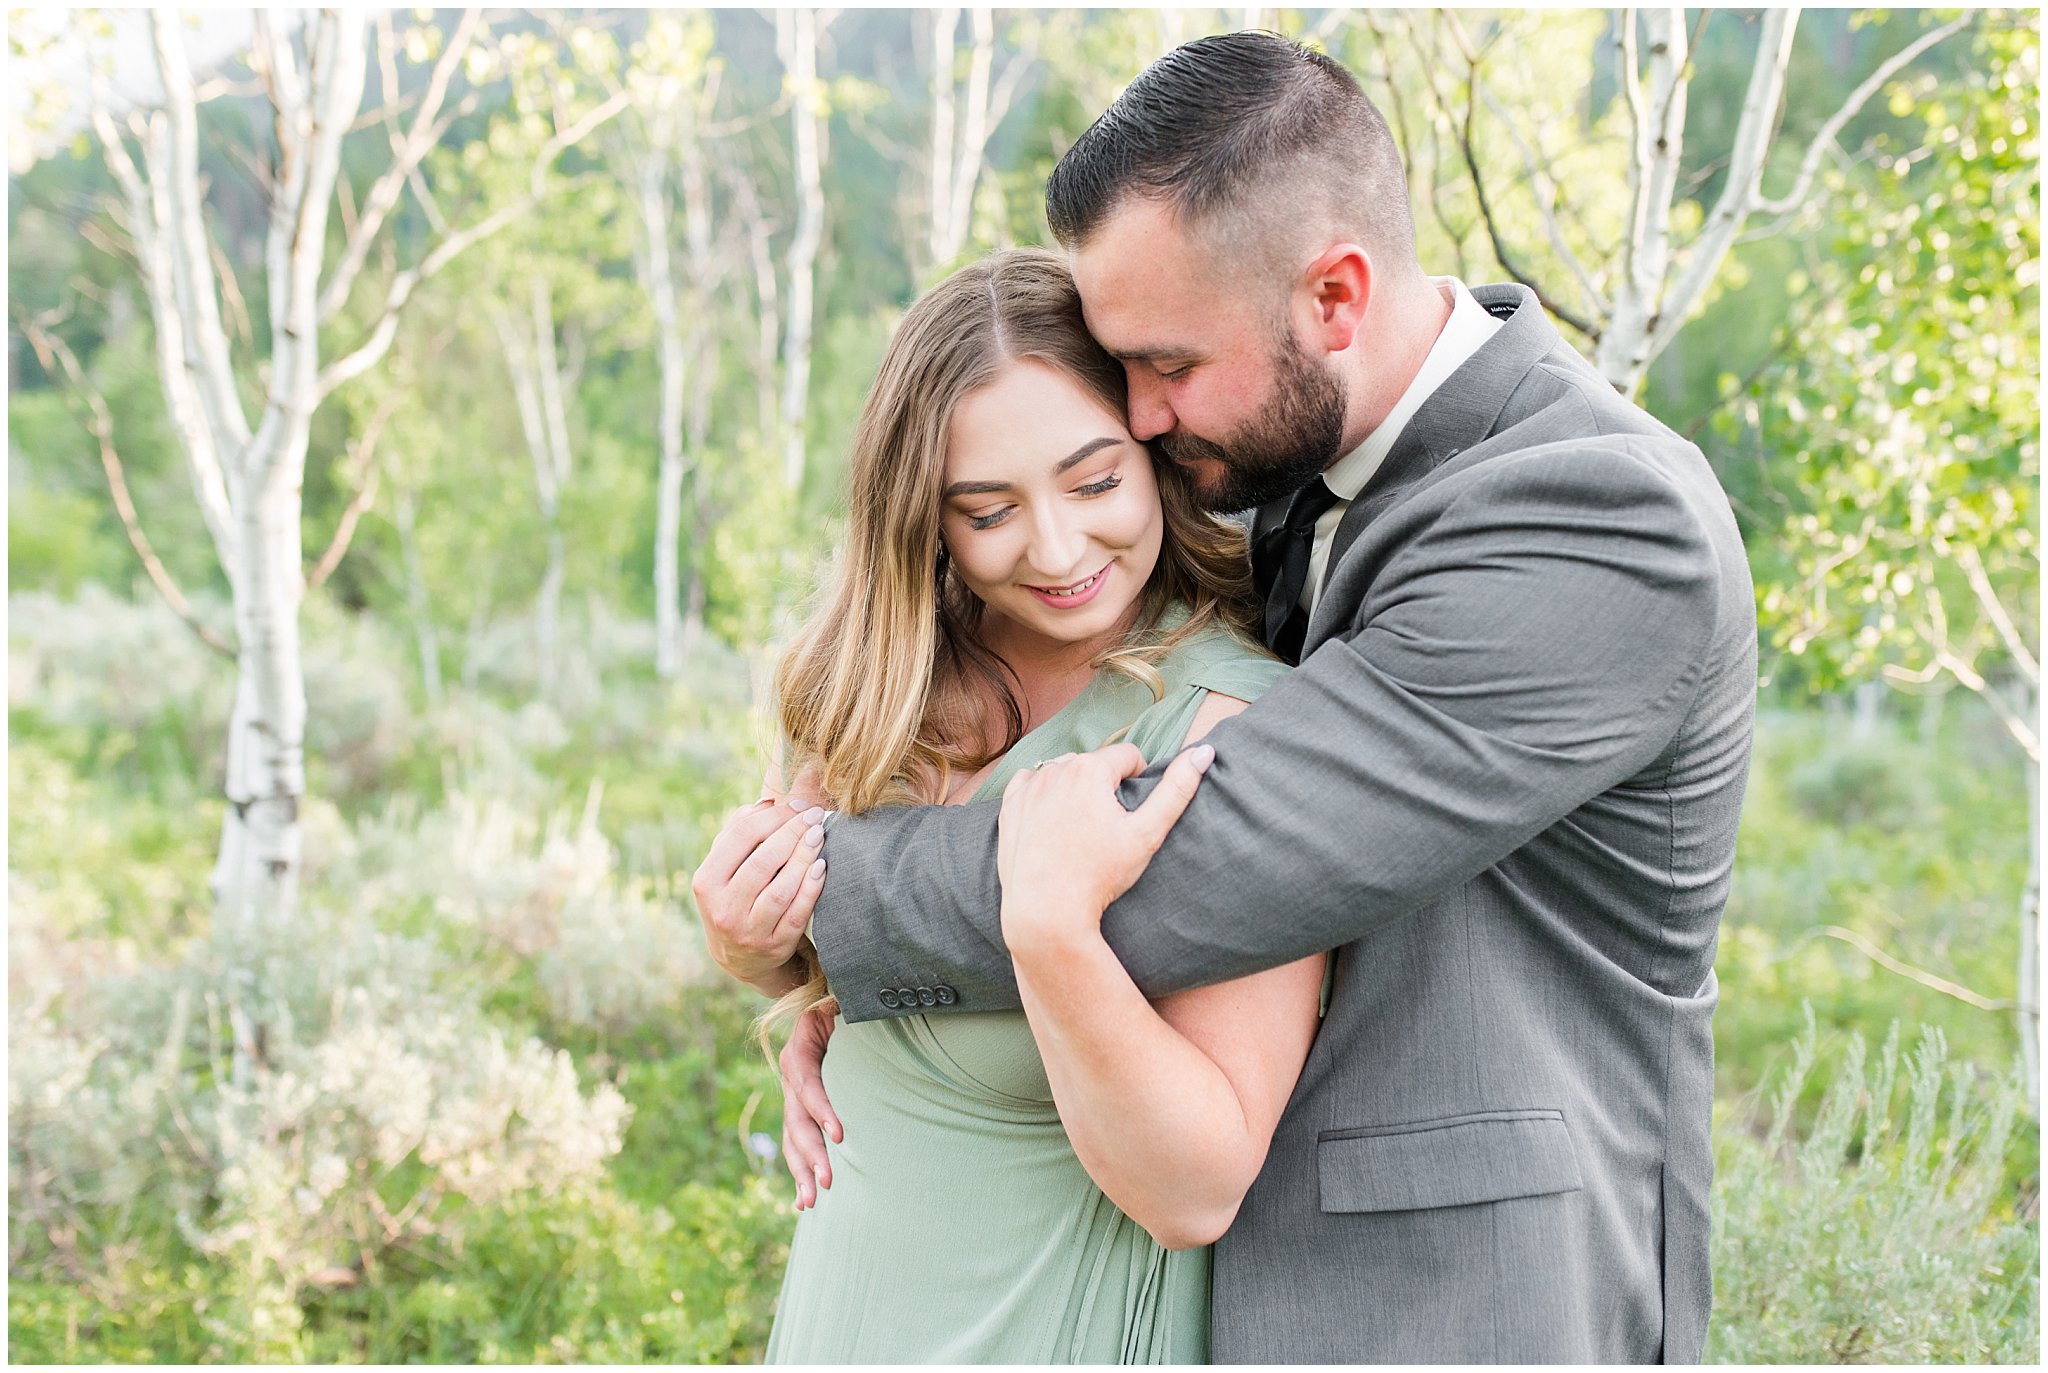 Couple in sage green dress and grey suit in aspen trees | Tibble Fork Summer Engagement Session | Jessie and Dallin Photography